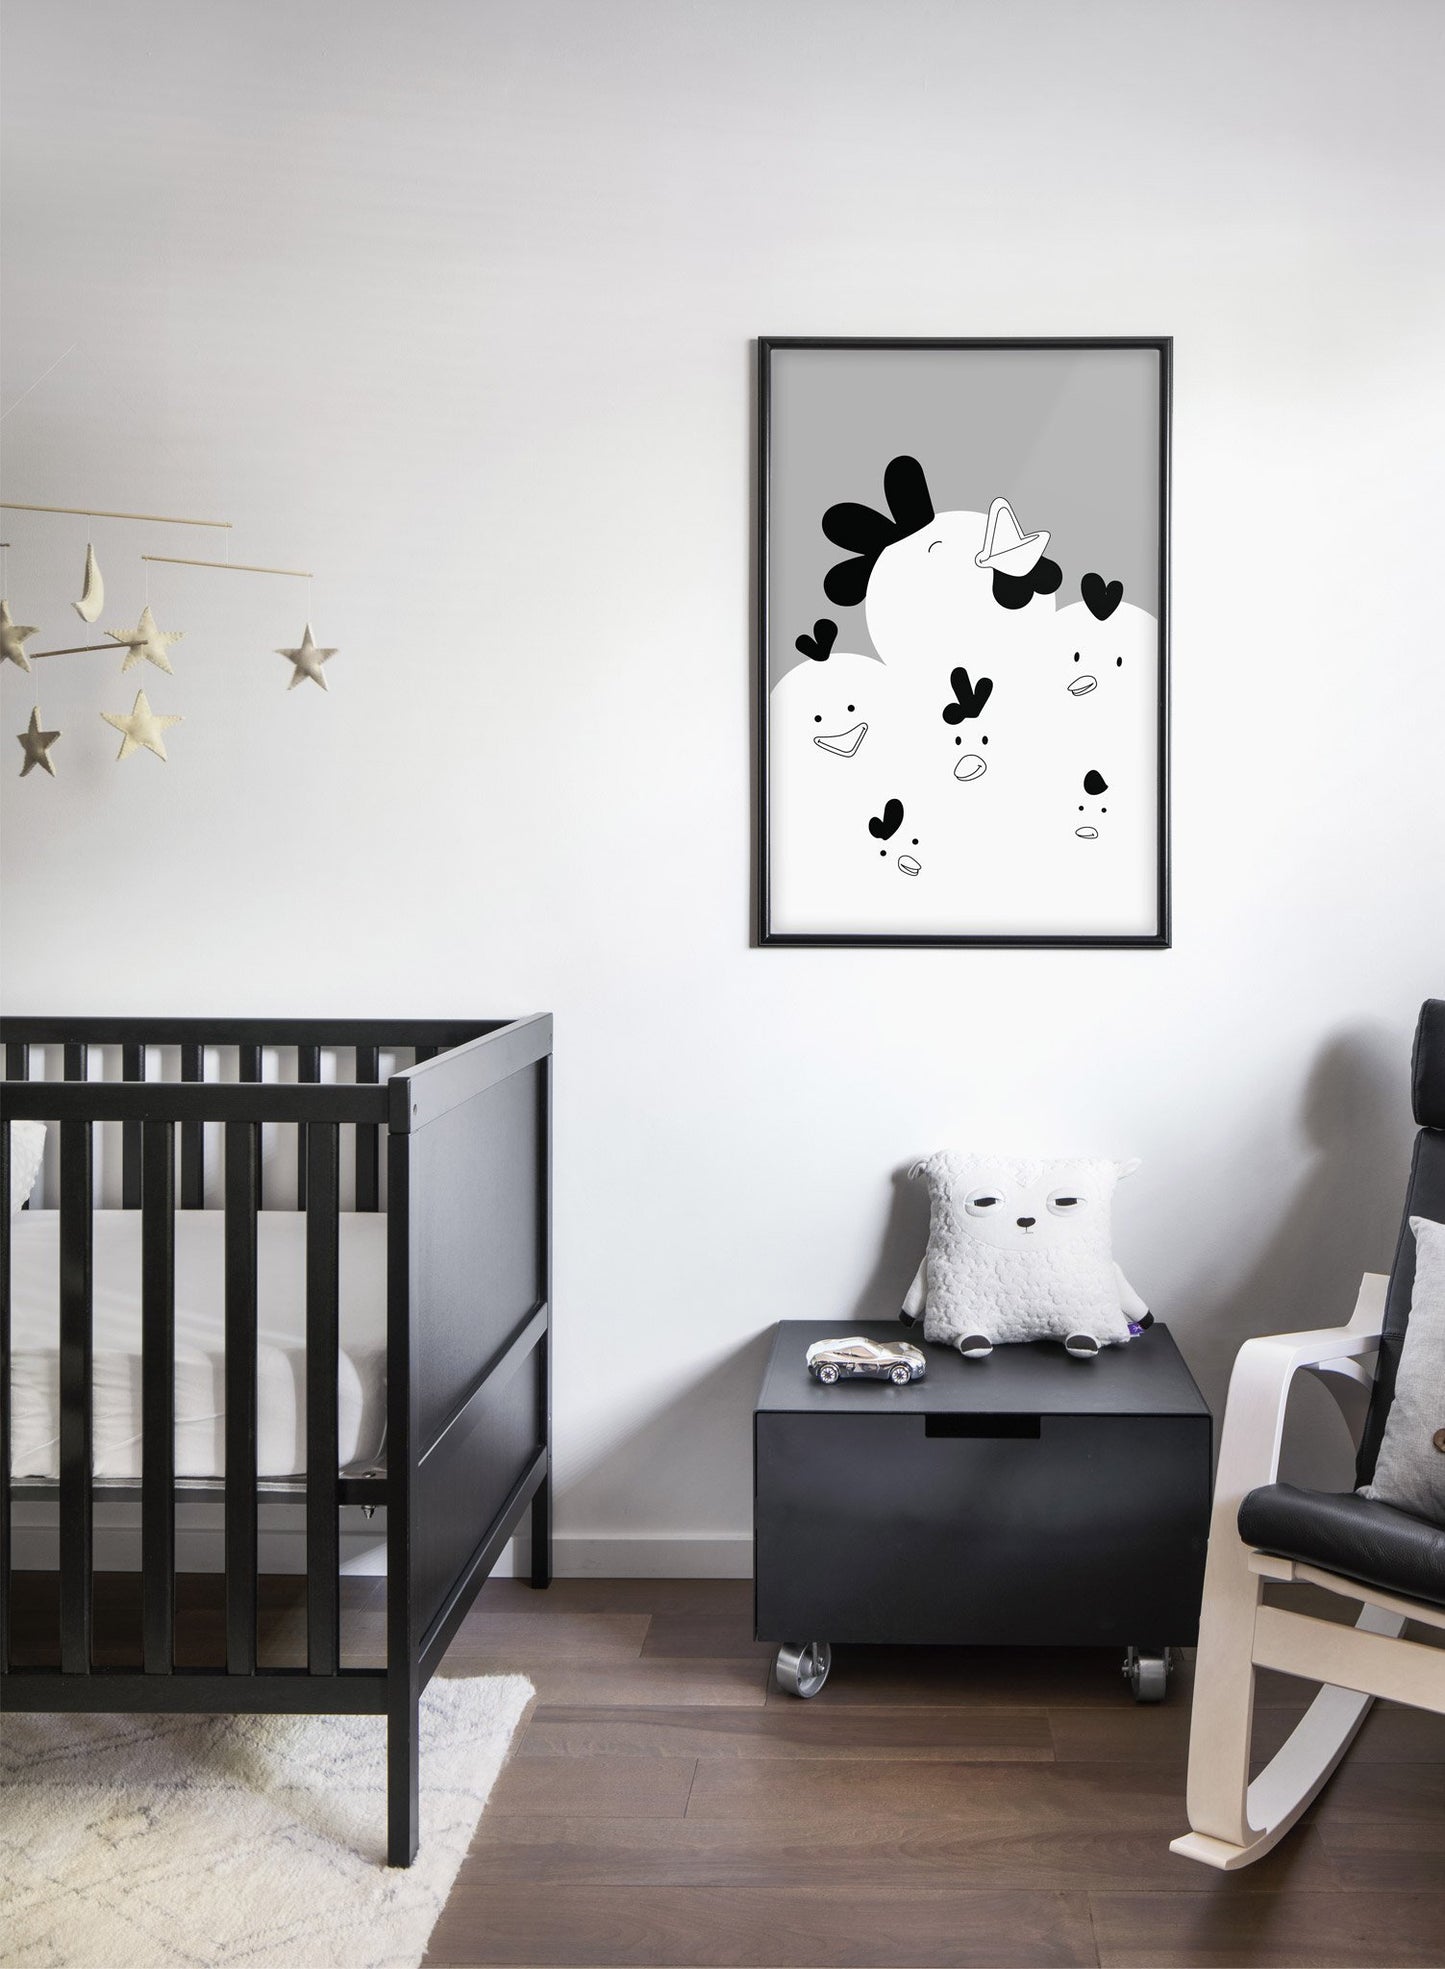 Modern minimalist poster by Opposite Wall with chicken illustration in black and white - kids collection - bedroom